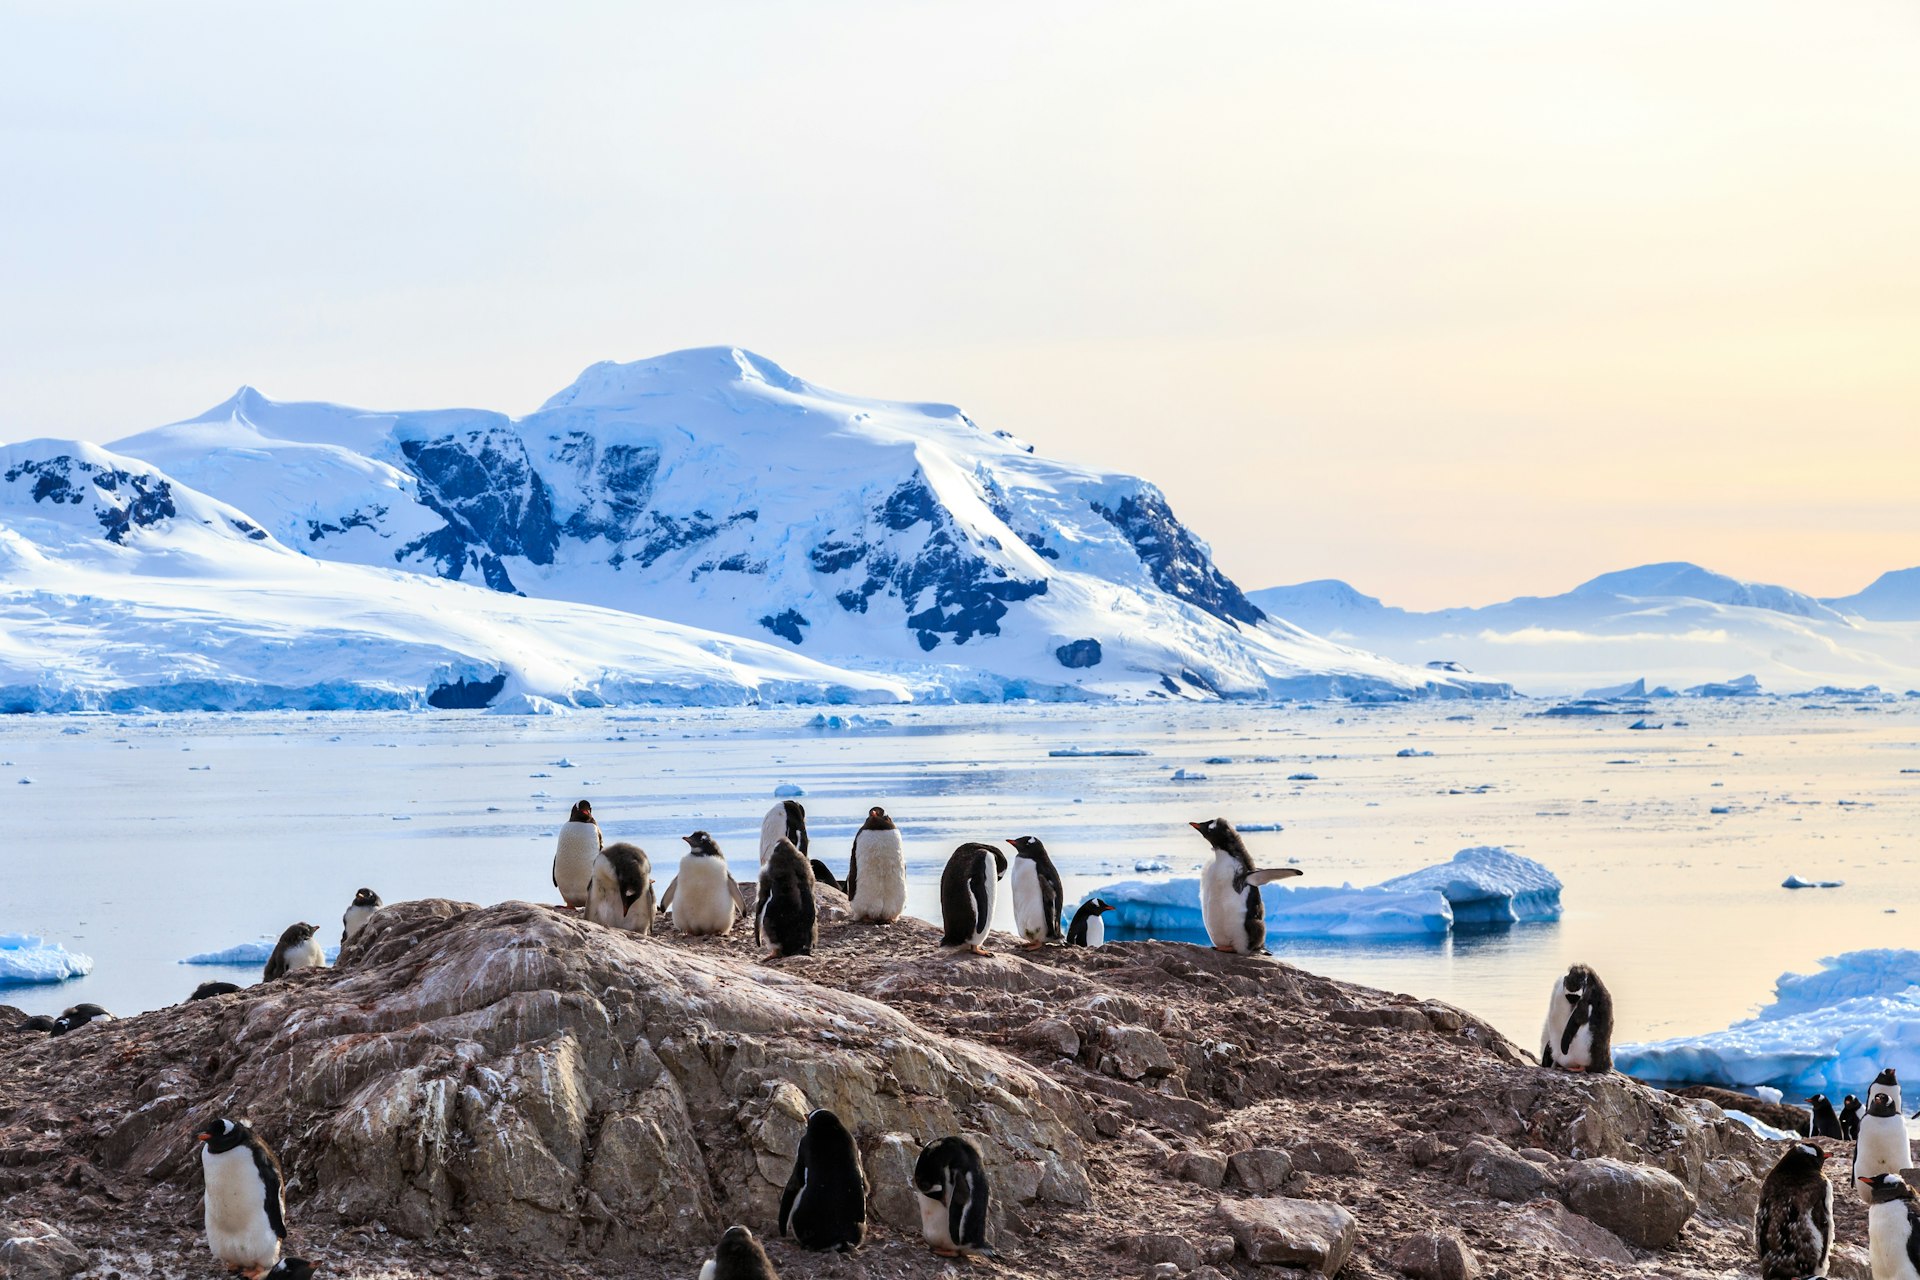 Rocky coastline overcrowded by gentoo penguins and glacier with icebergs in the background at Neco bay, Antarcti